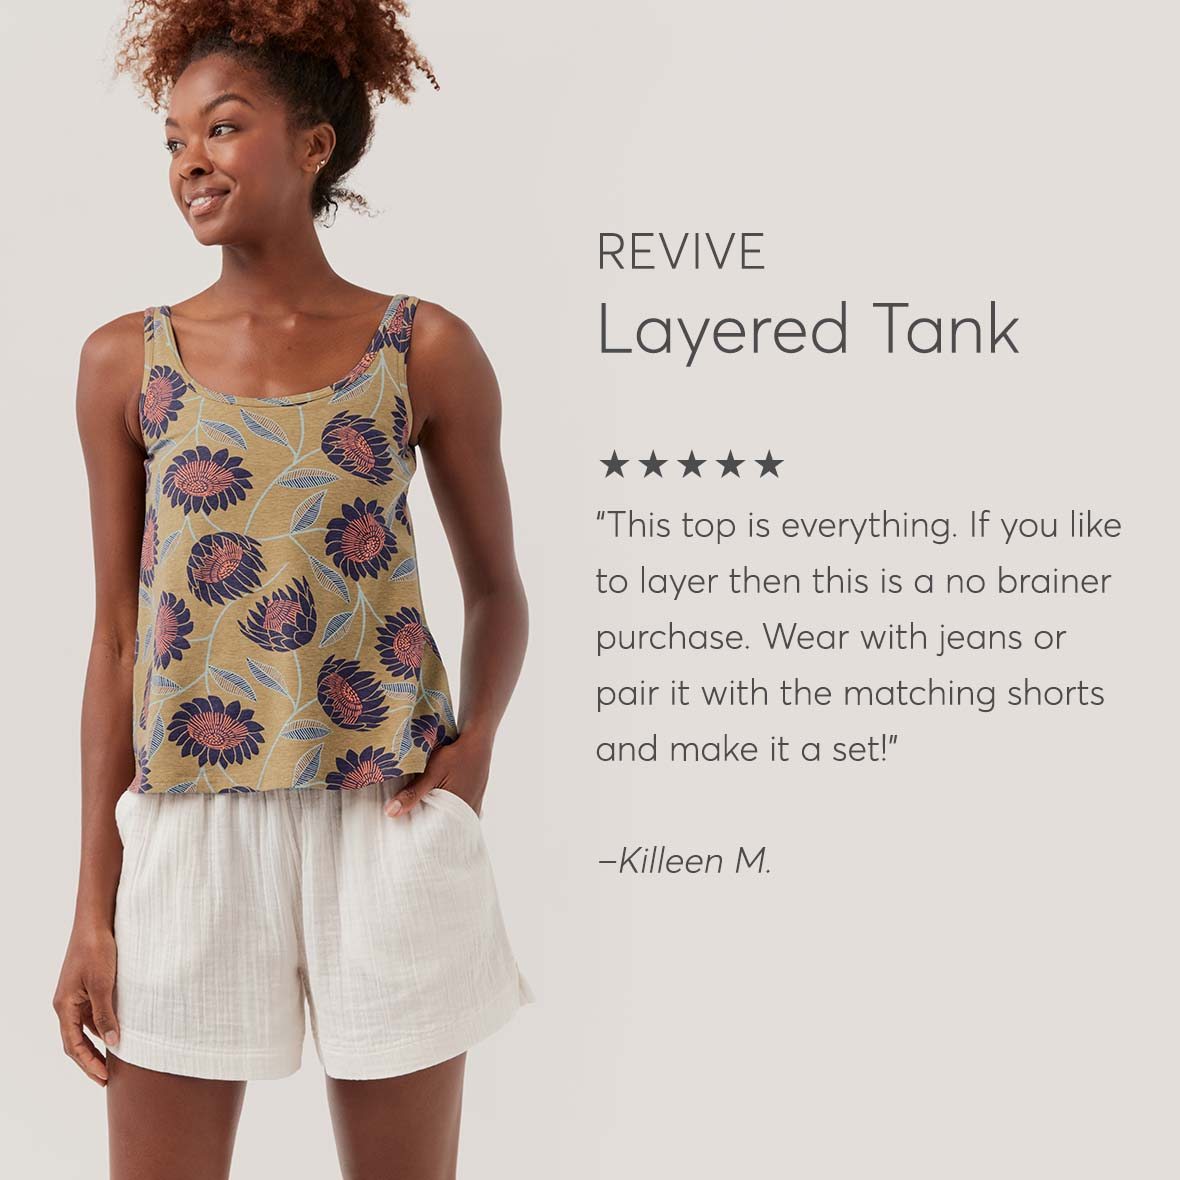 Revive Layered Tank: This top is everything. If you like to layer then this is a no brainer purchase. Wear with jeans or pair it with the matching shorts and make it a set!